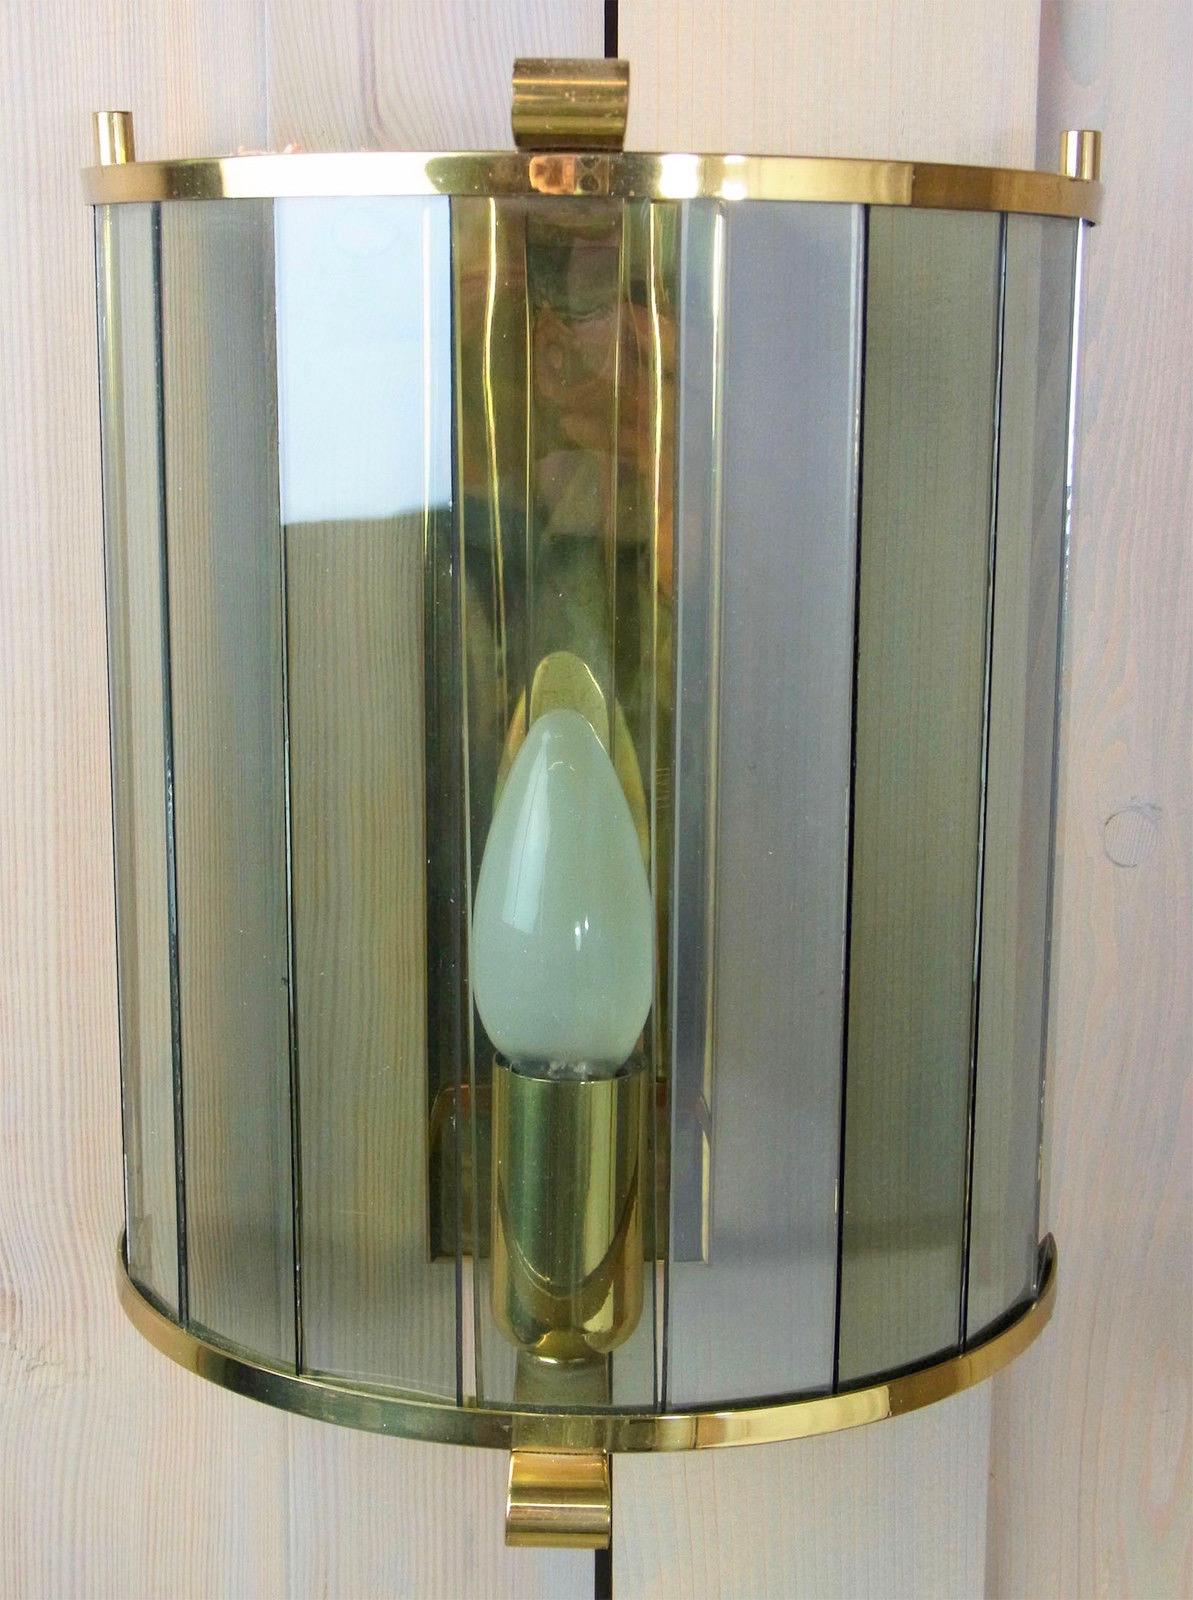 Elegant German Mid-Century Modern wall light with tinted glass panes in a brass base. Manufactured in Germany. This fixture requires one European E14 candelabra bulb, up to 60 watts.